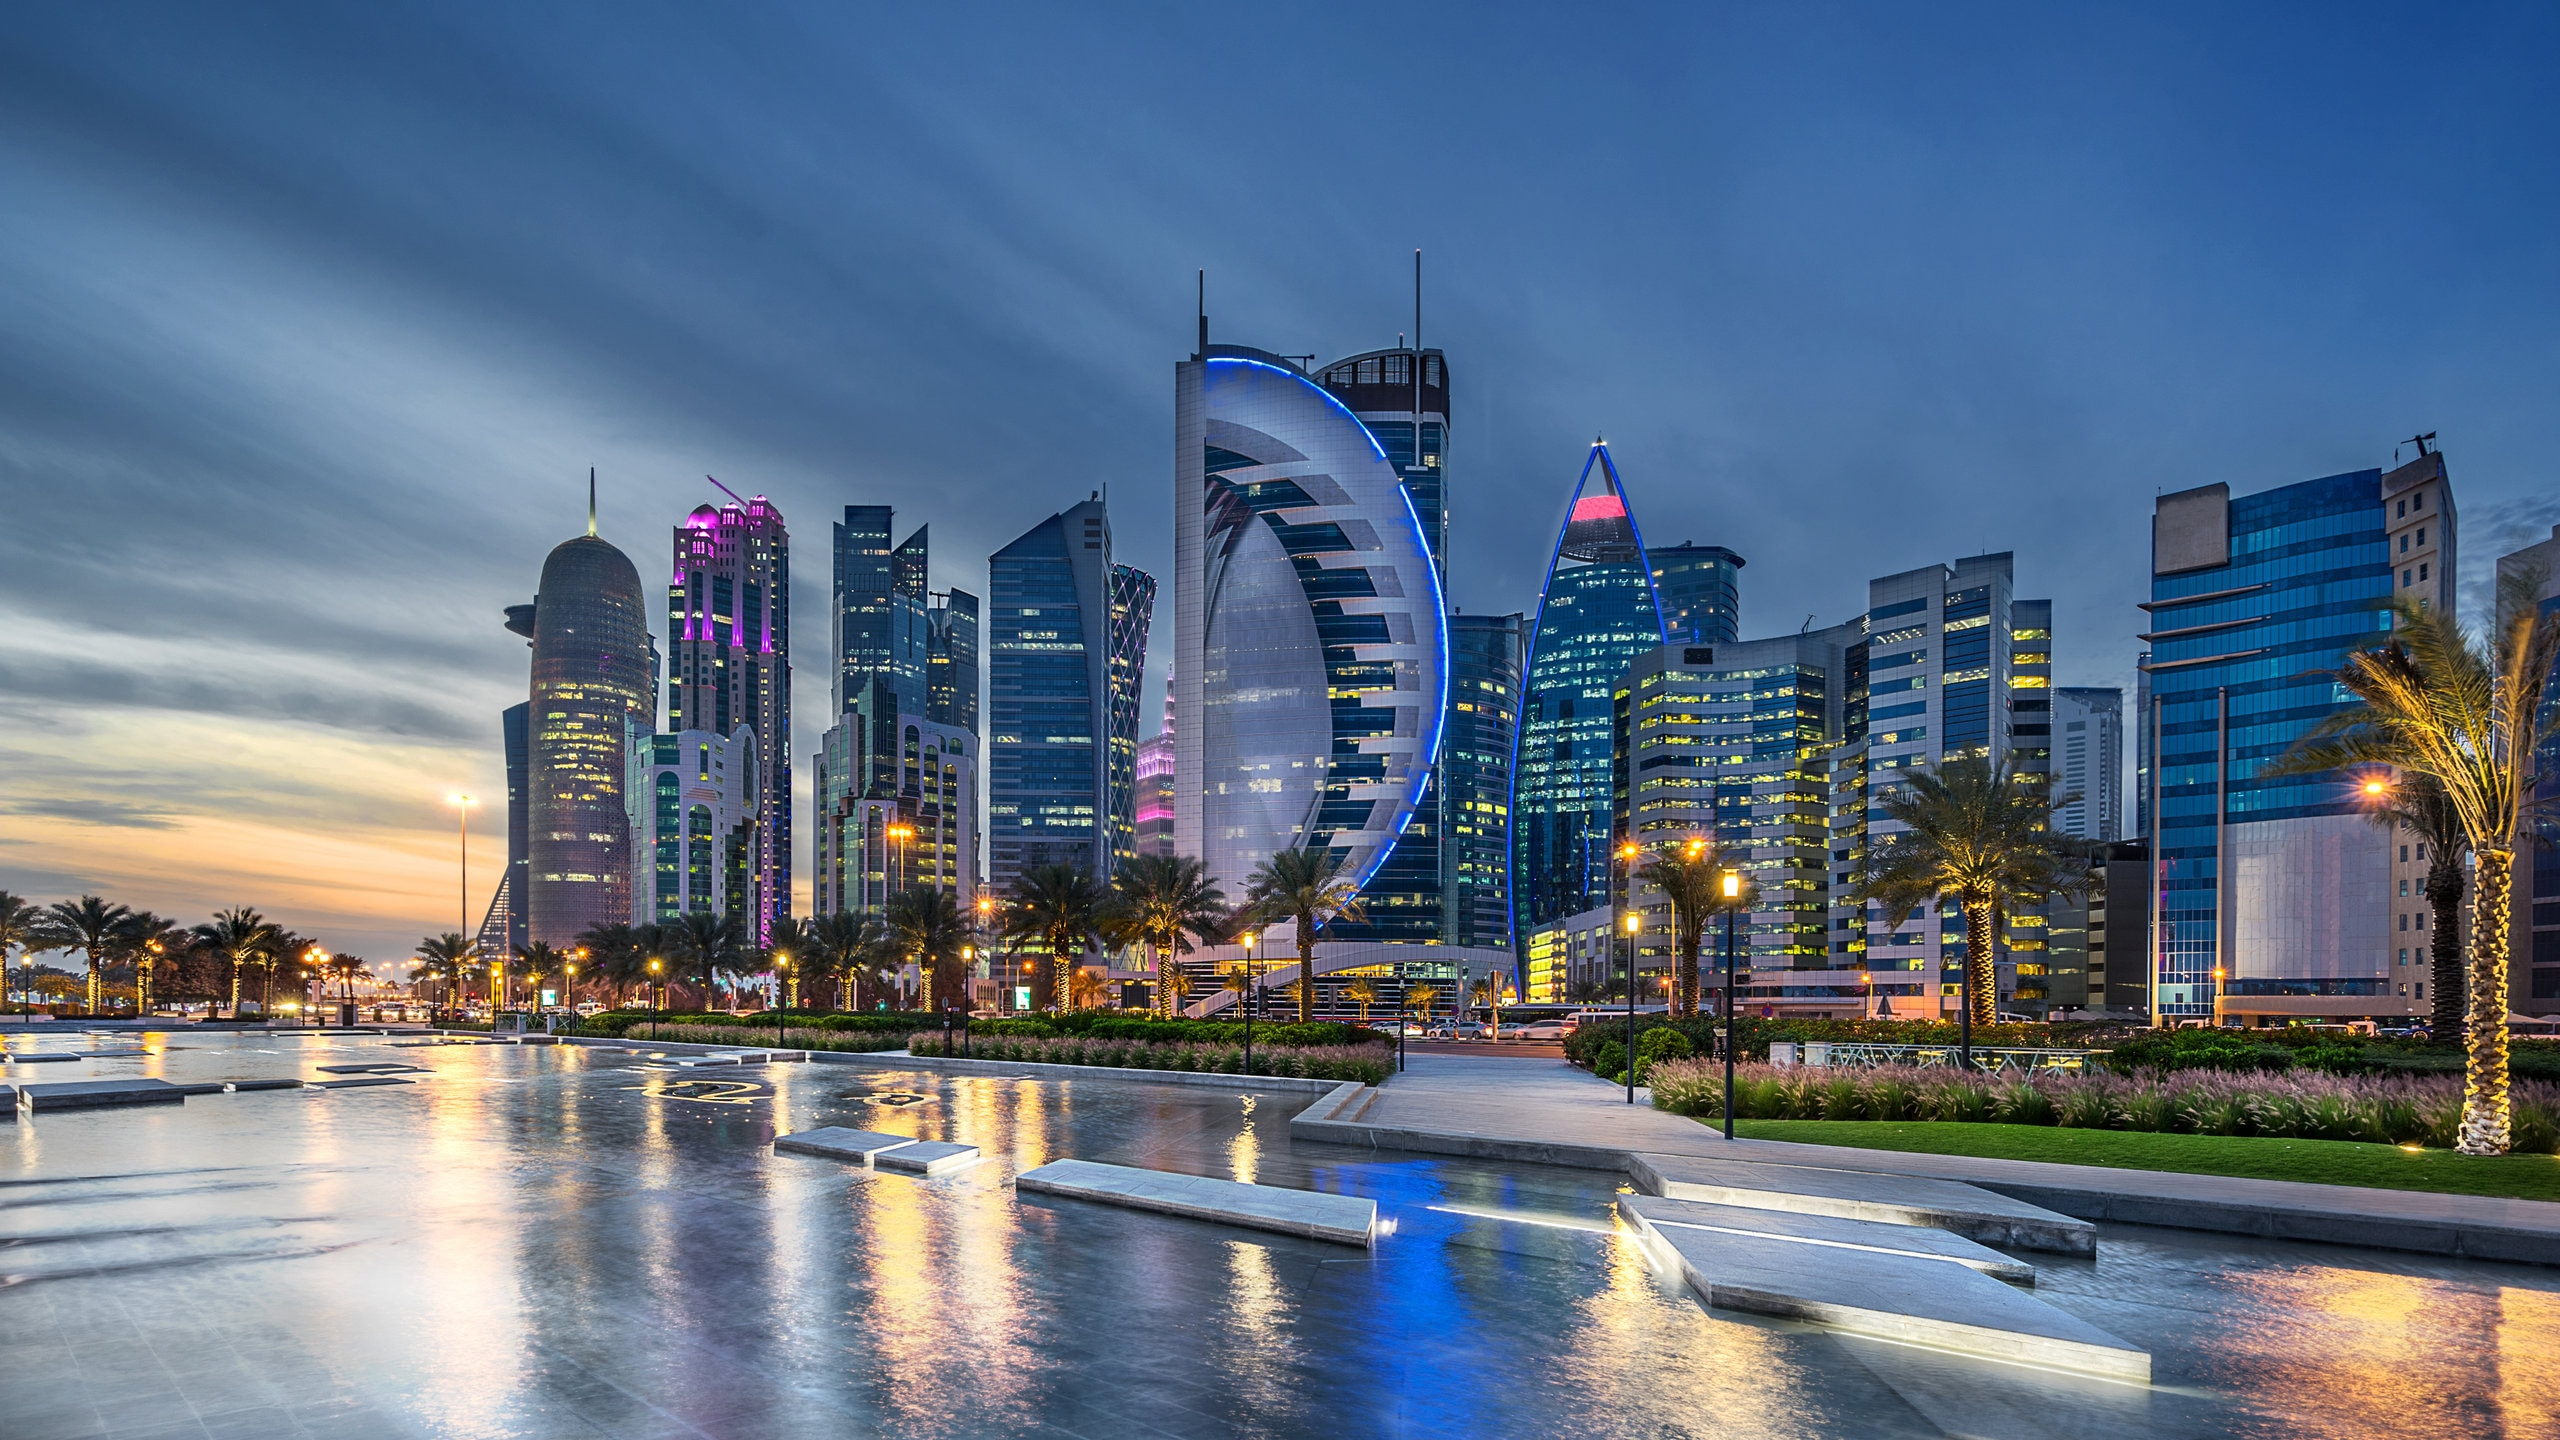 Qatar is one of the richest countries in the world